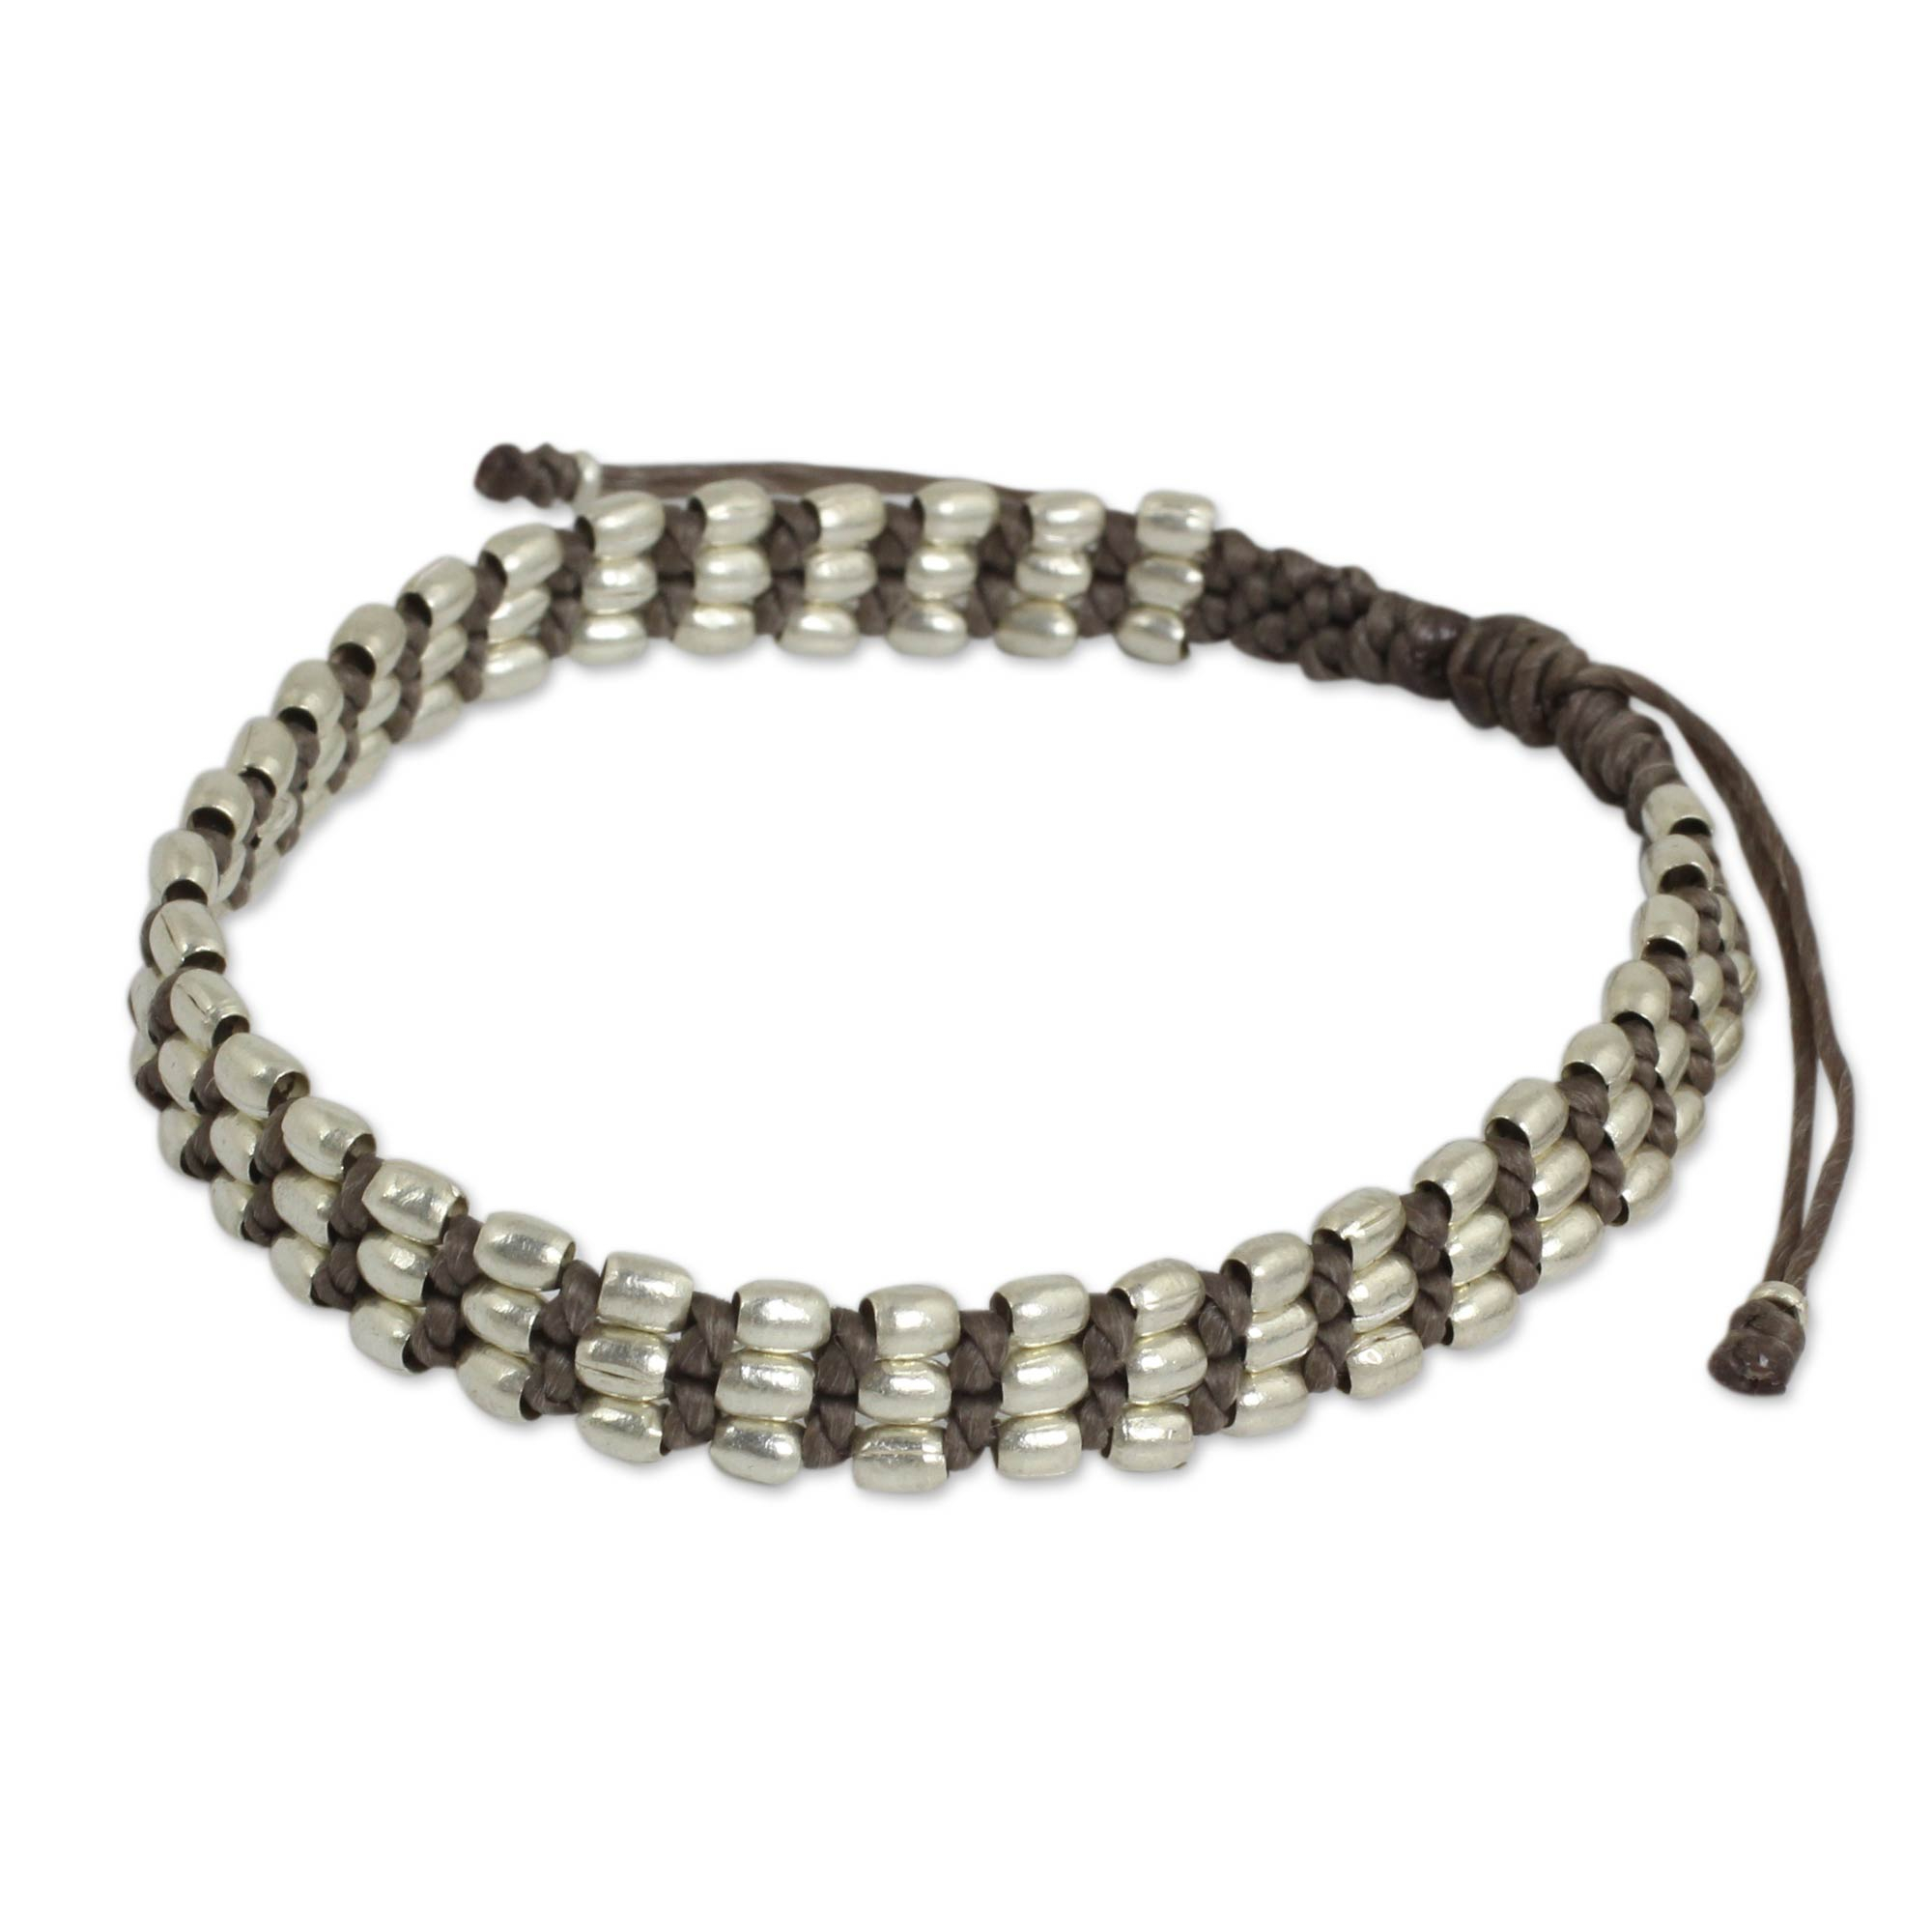 Fair Trade Taupe Cord Bracelet with Silver 950 Beads - Friendly Taupe ...